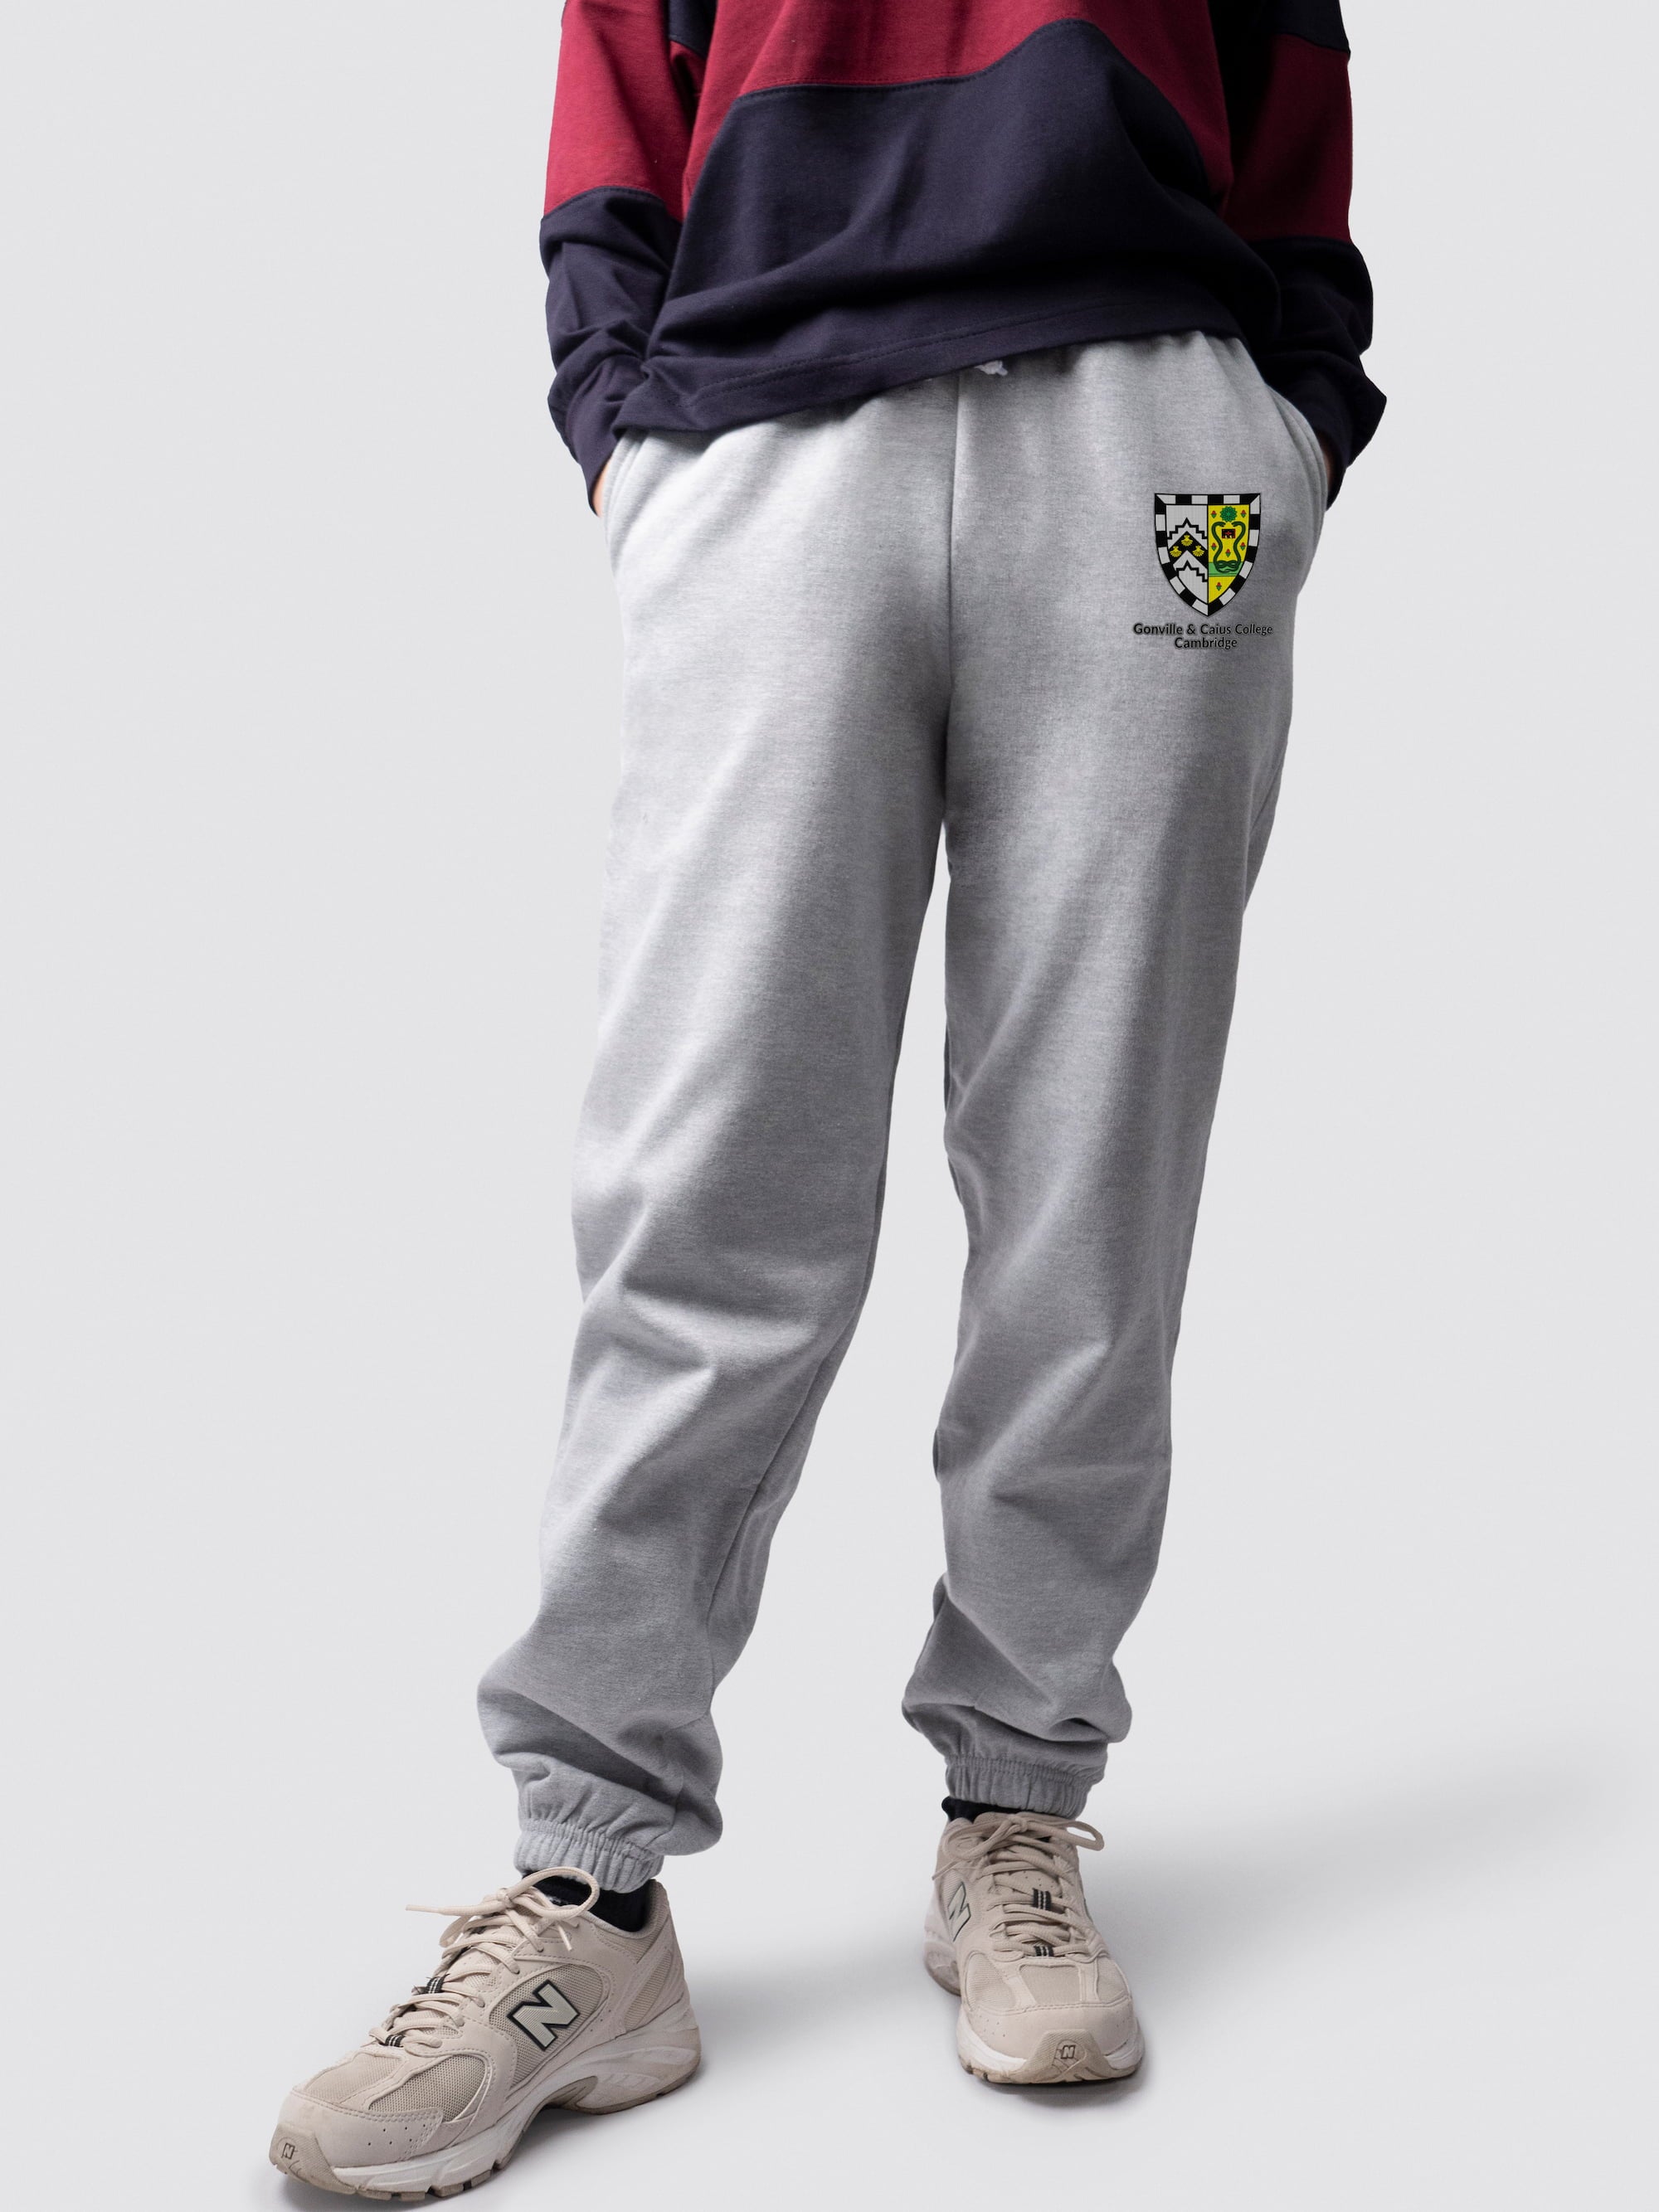 undergraduate cuffed sweatpants, made from soft cotton fabric, with Gonville & Caius logo